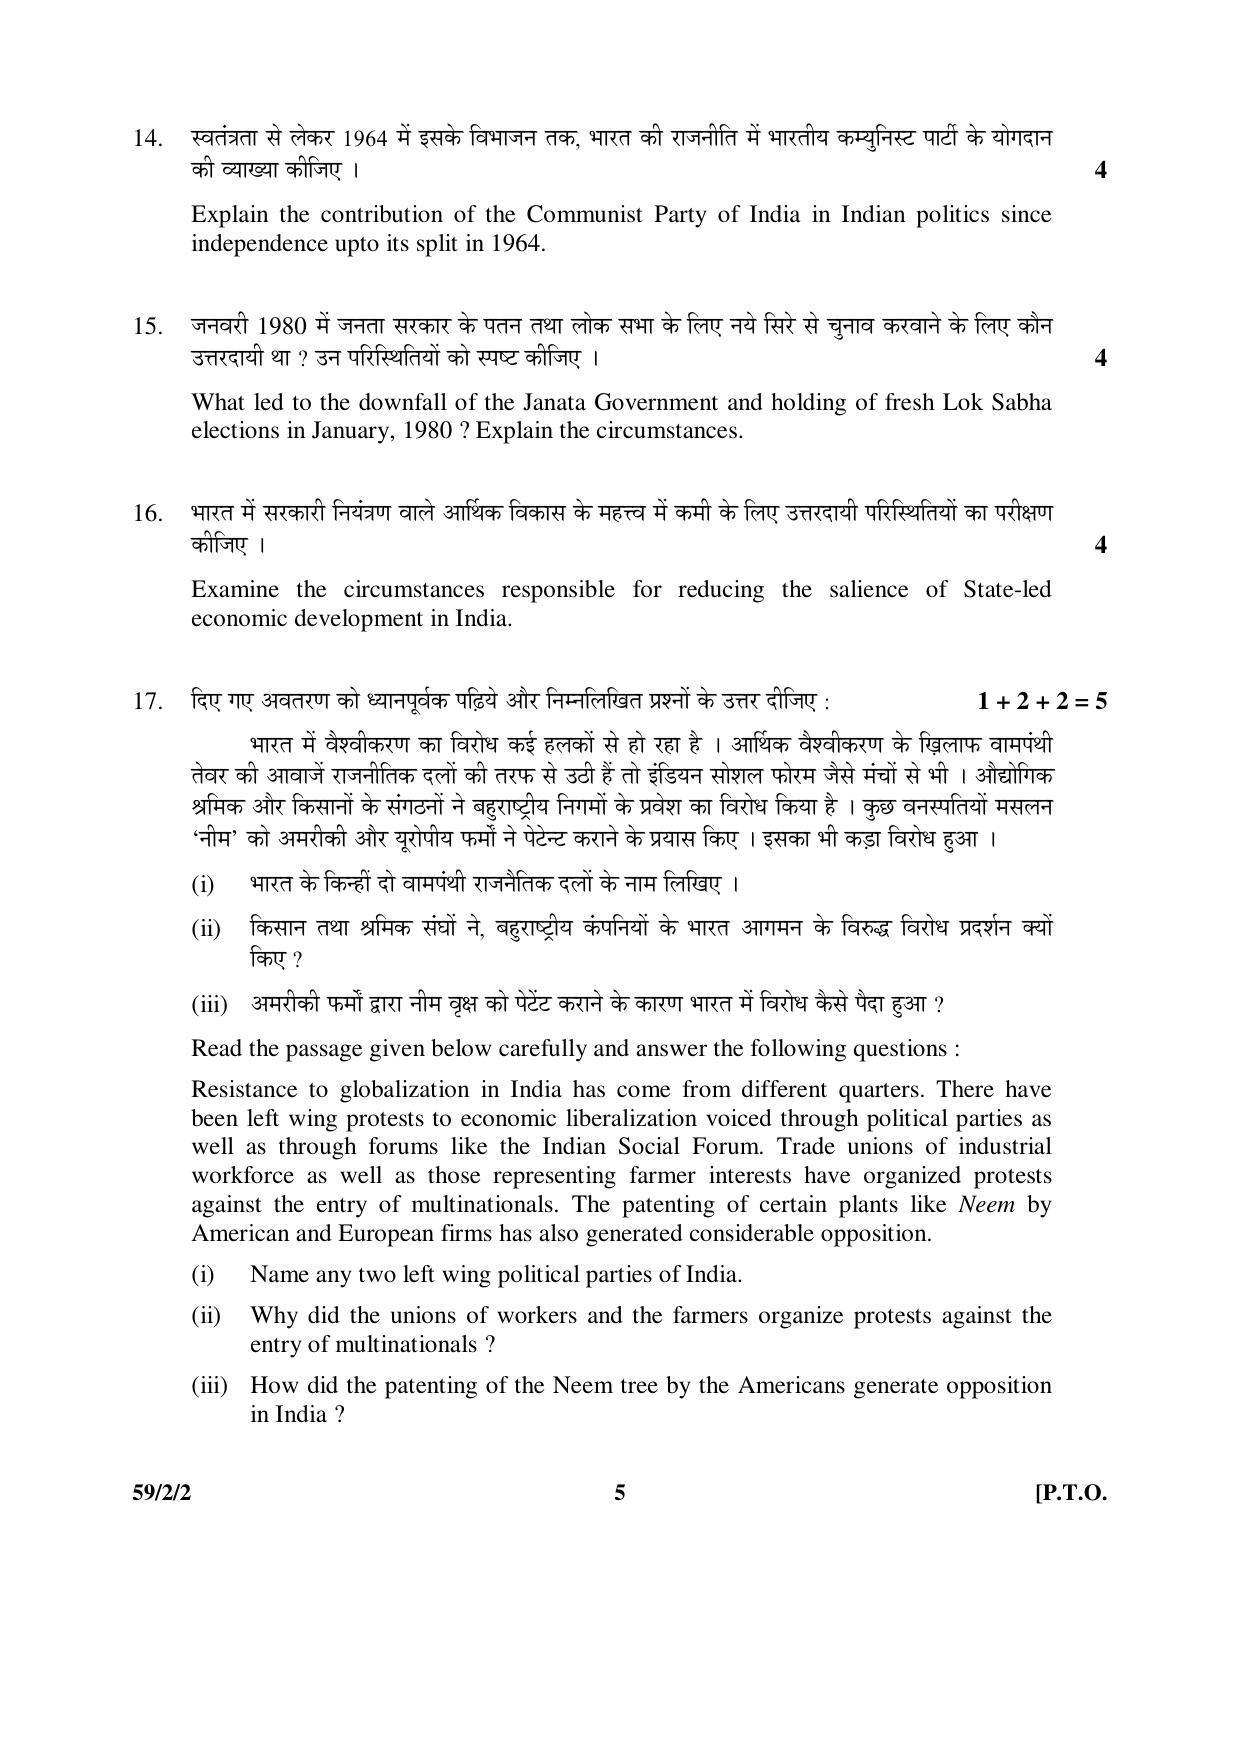 CBSE Class 12 59-2-2 _Political Science 2016 Question Paper - Page 5